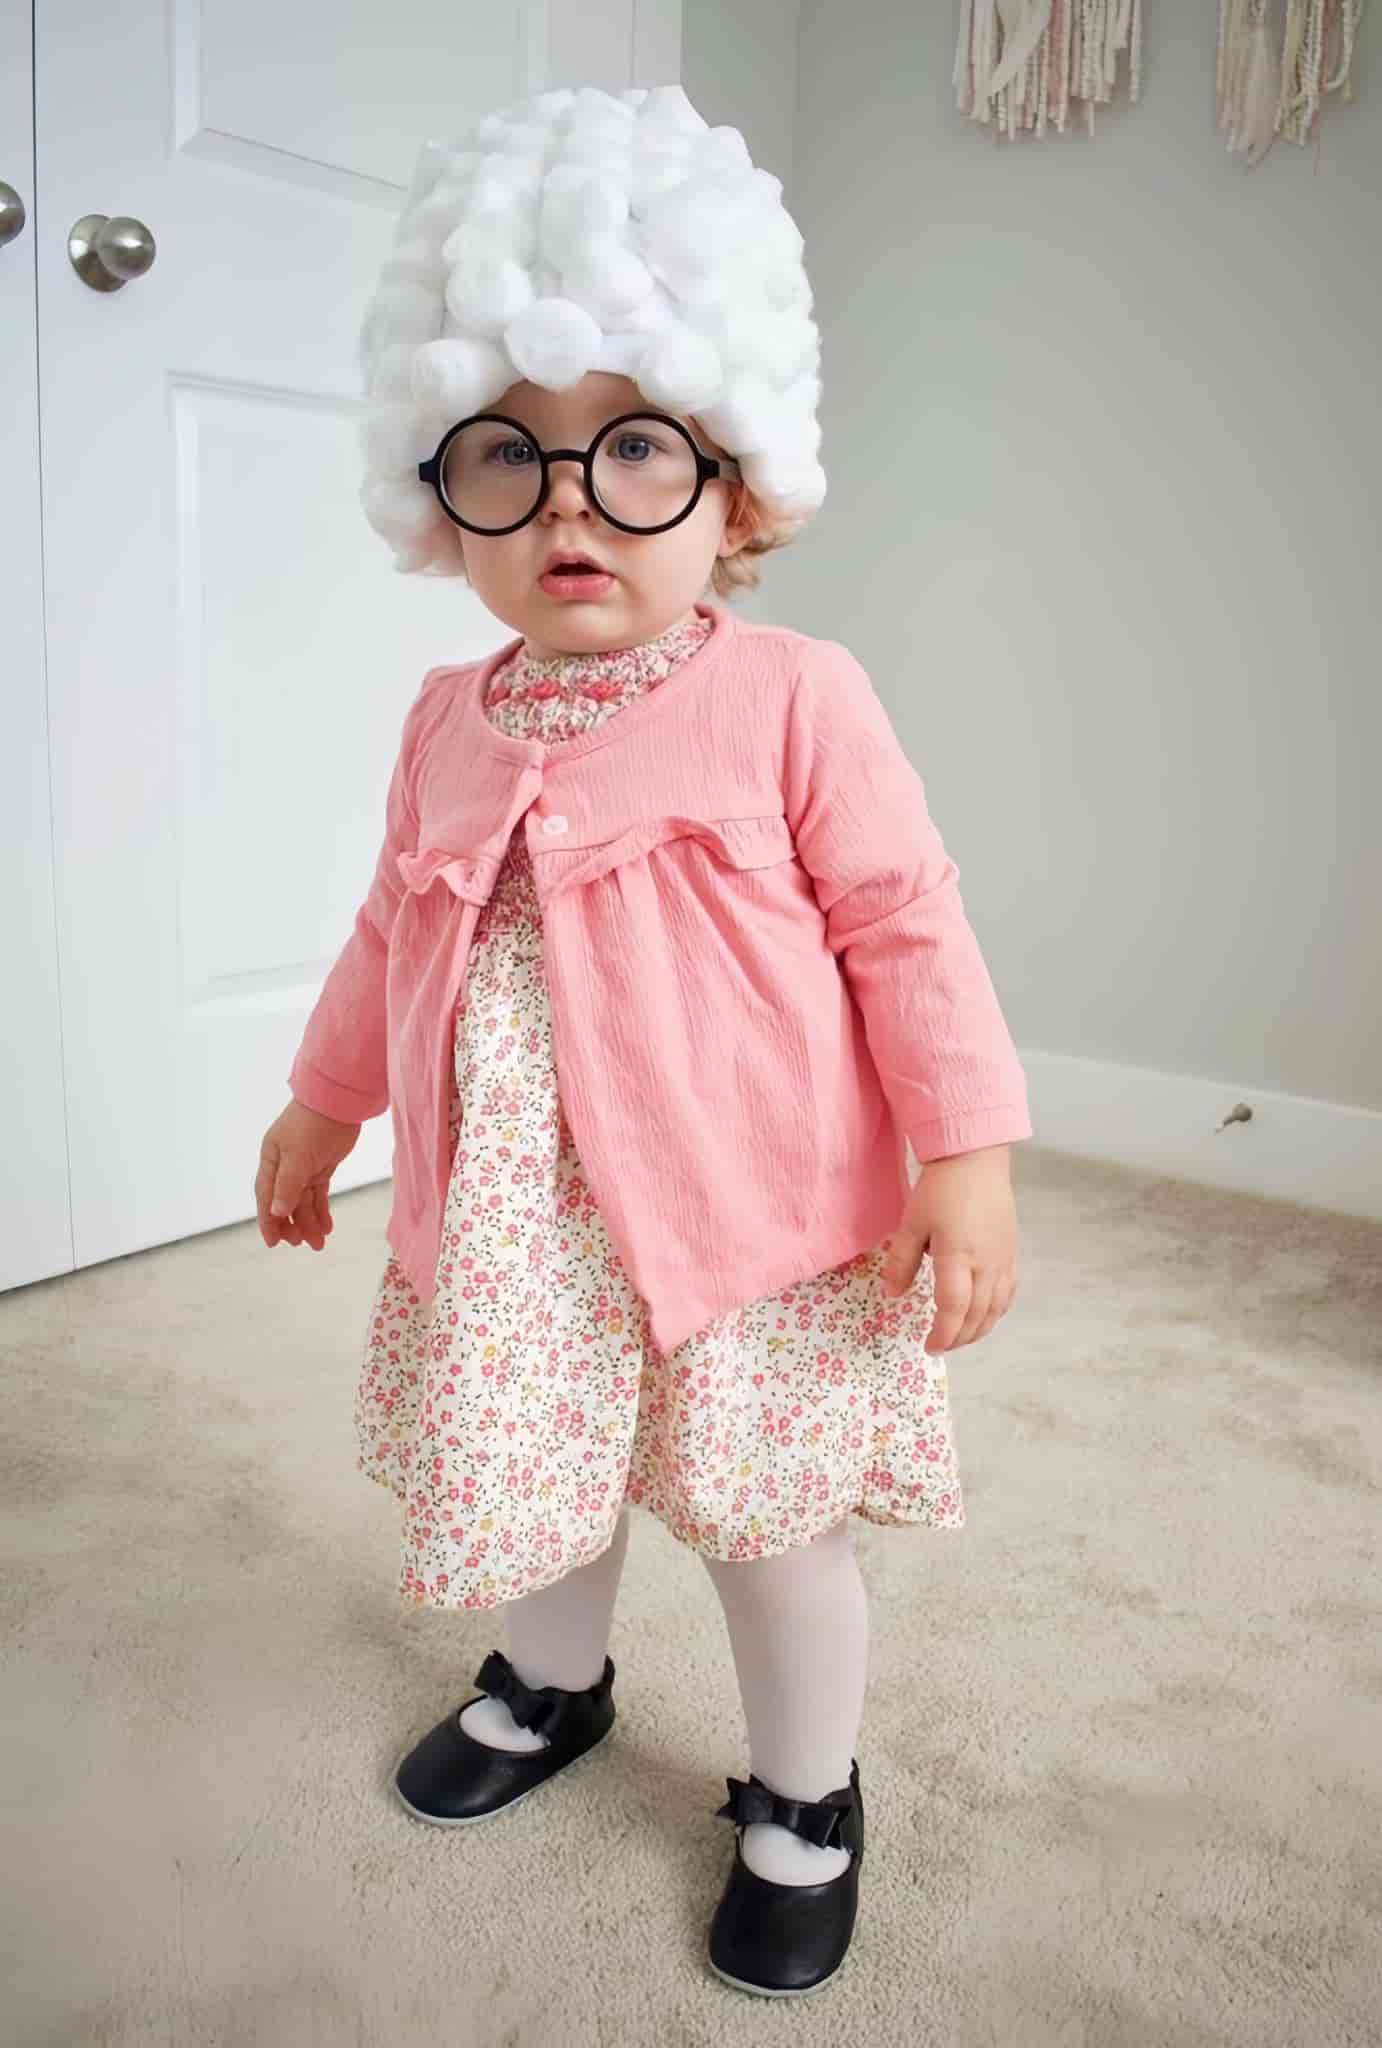 Funny and adorable moments when children dress up